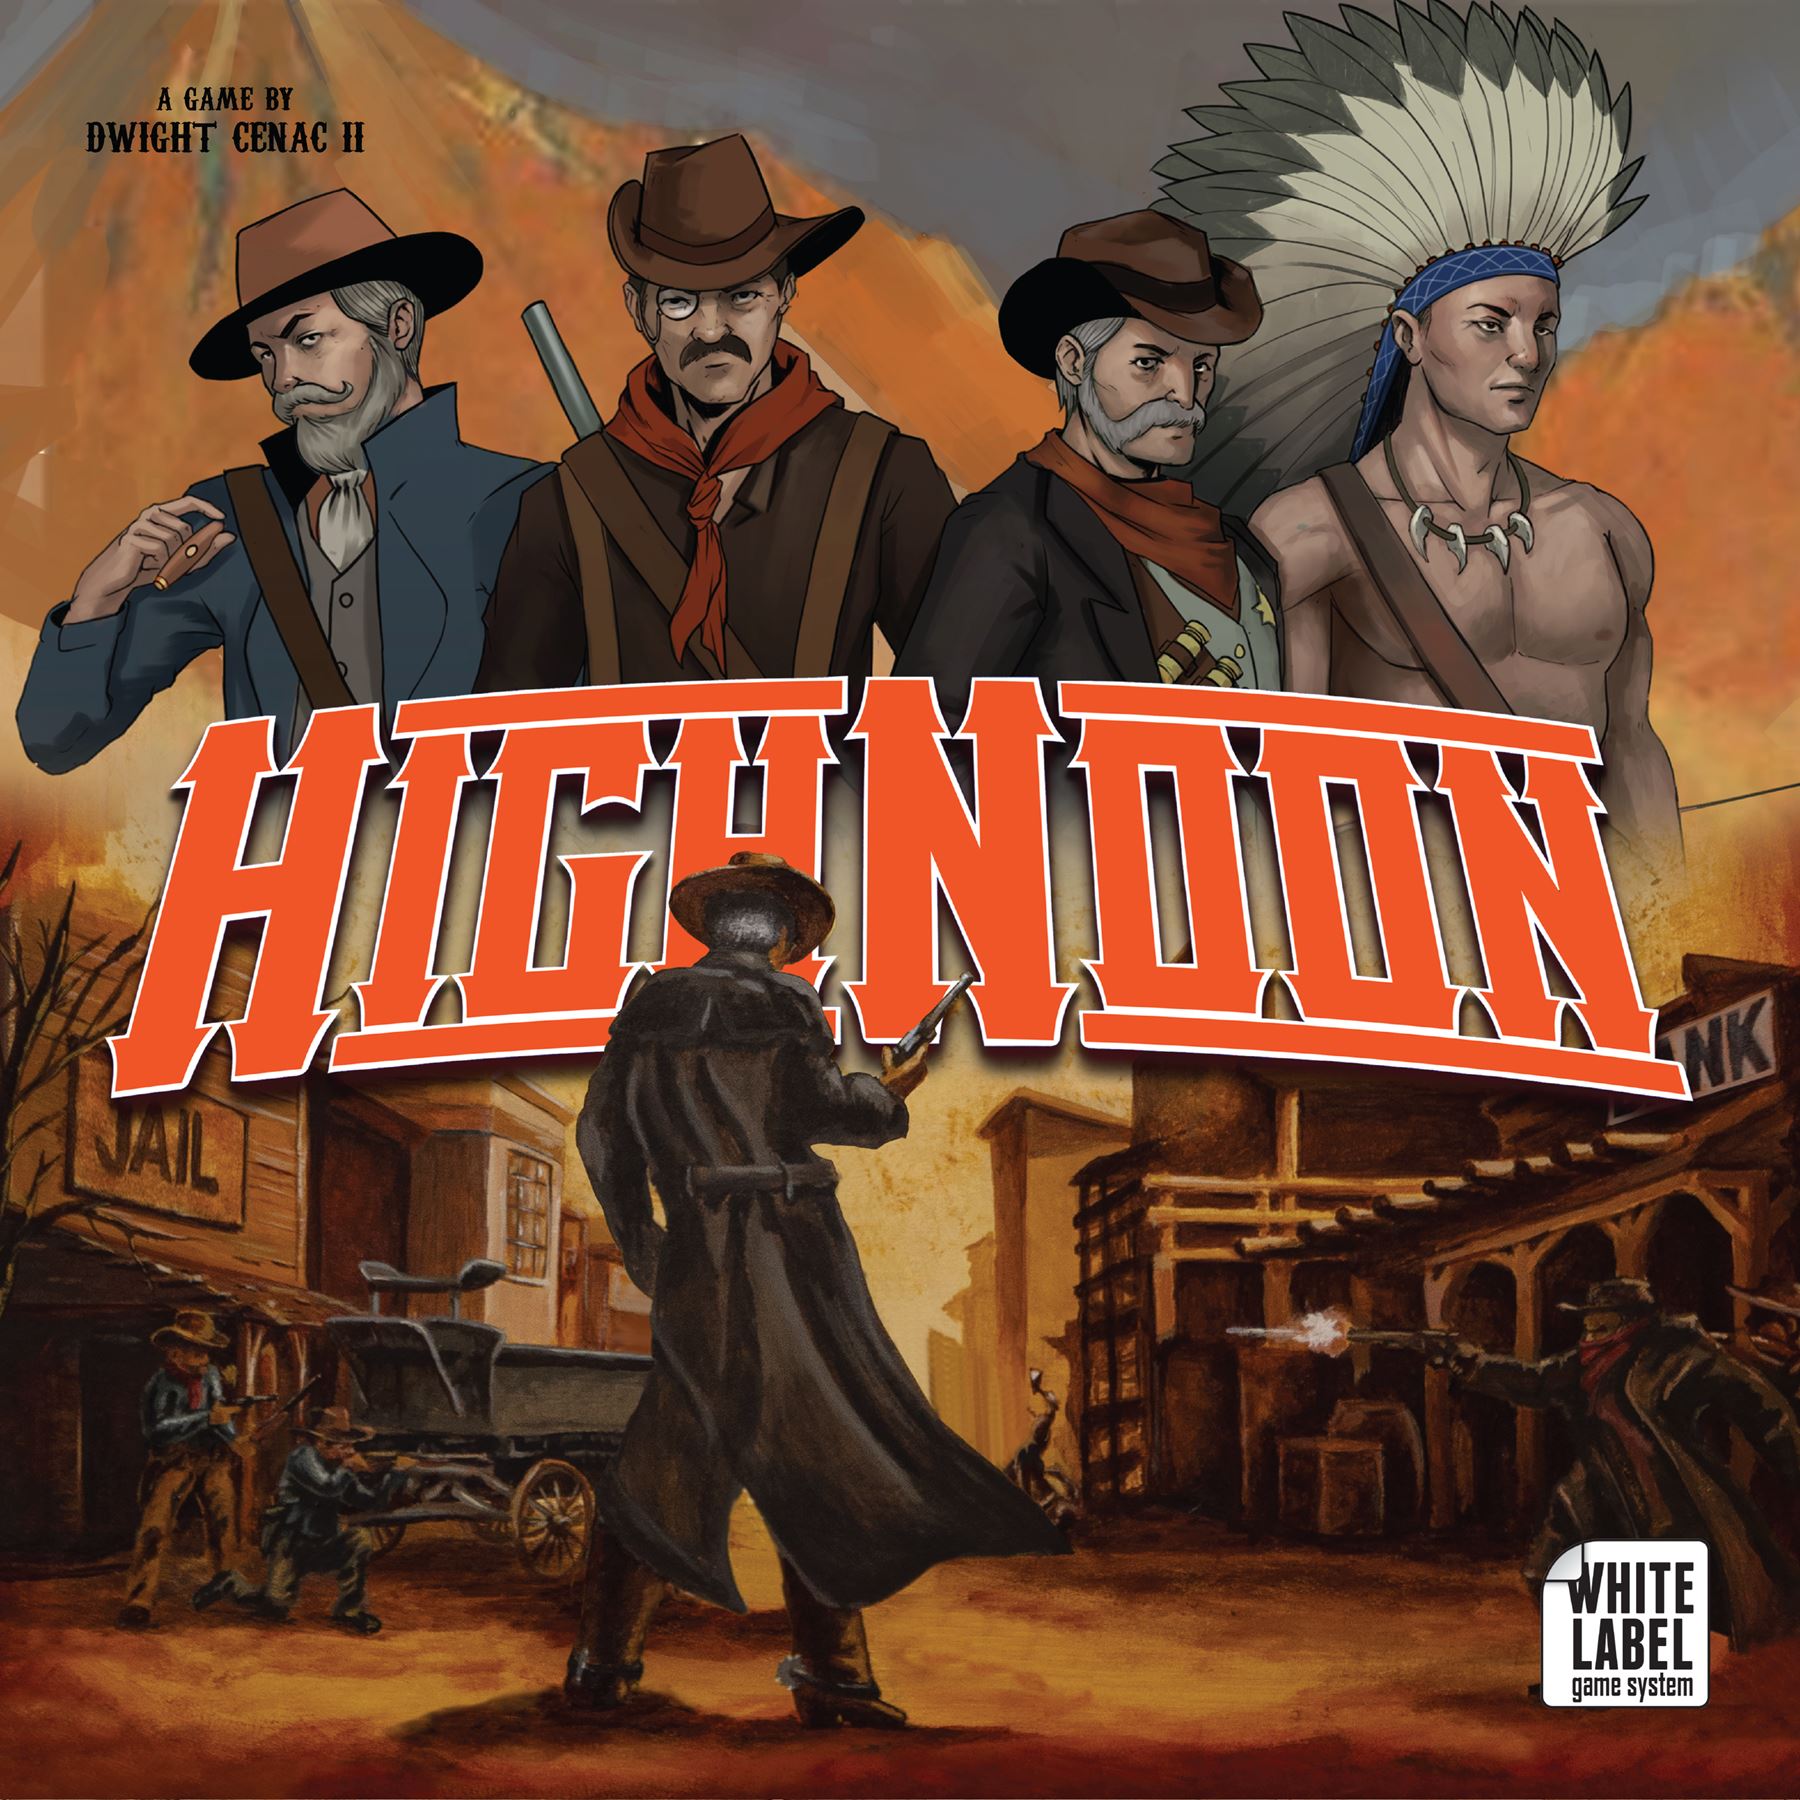 High Noon Cover